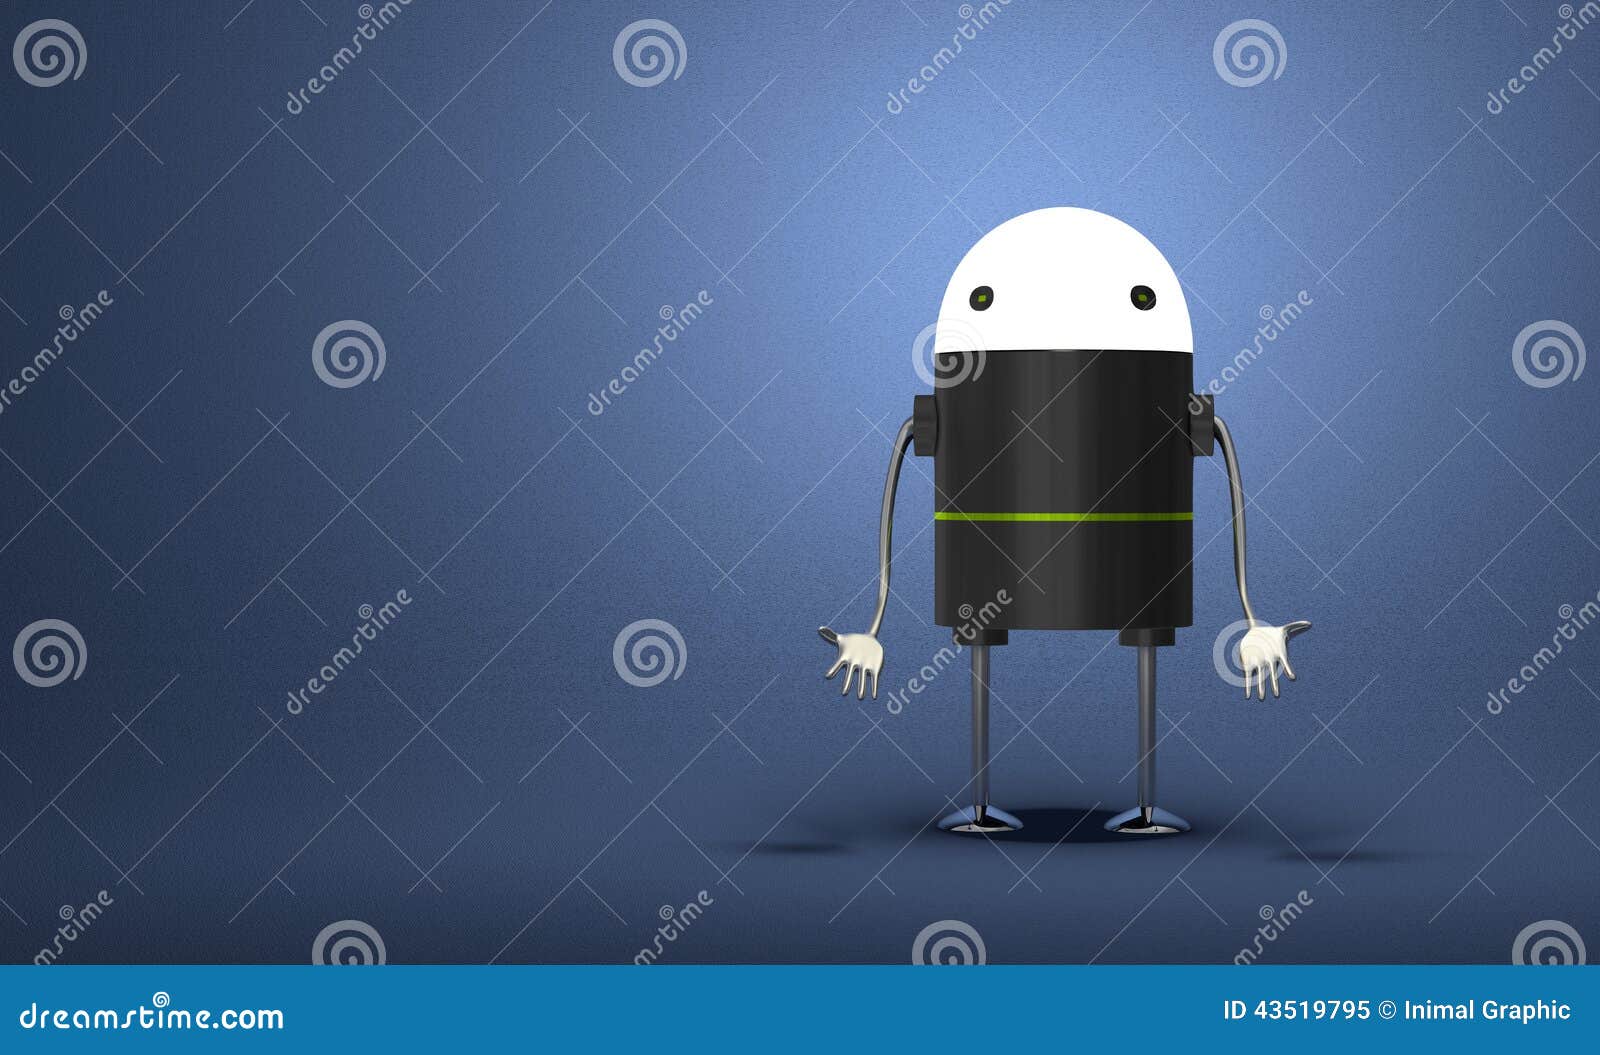 discouraged robot with glowing head